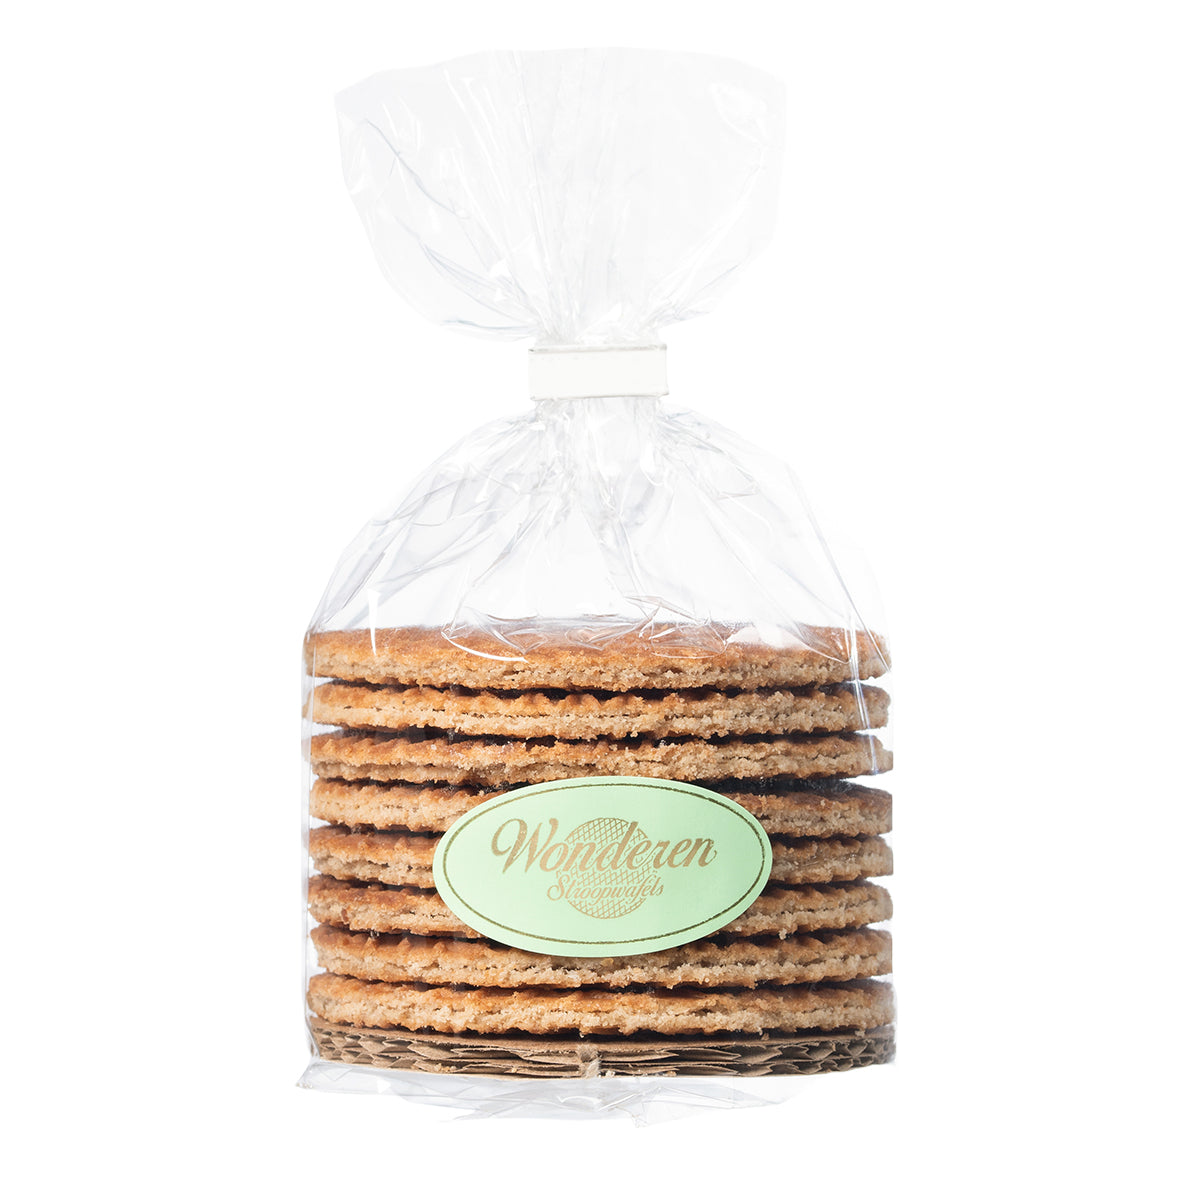 A stack of authentic Wonderen Stroopwafels in a plastic bag on a white background.